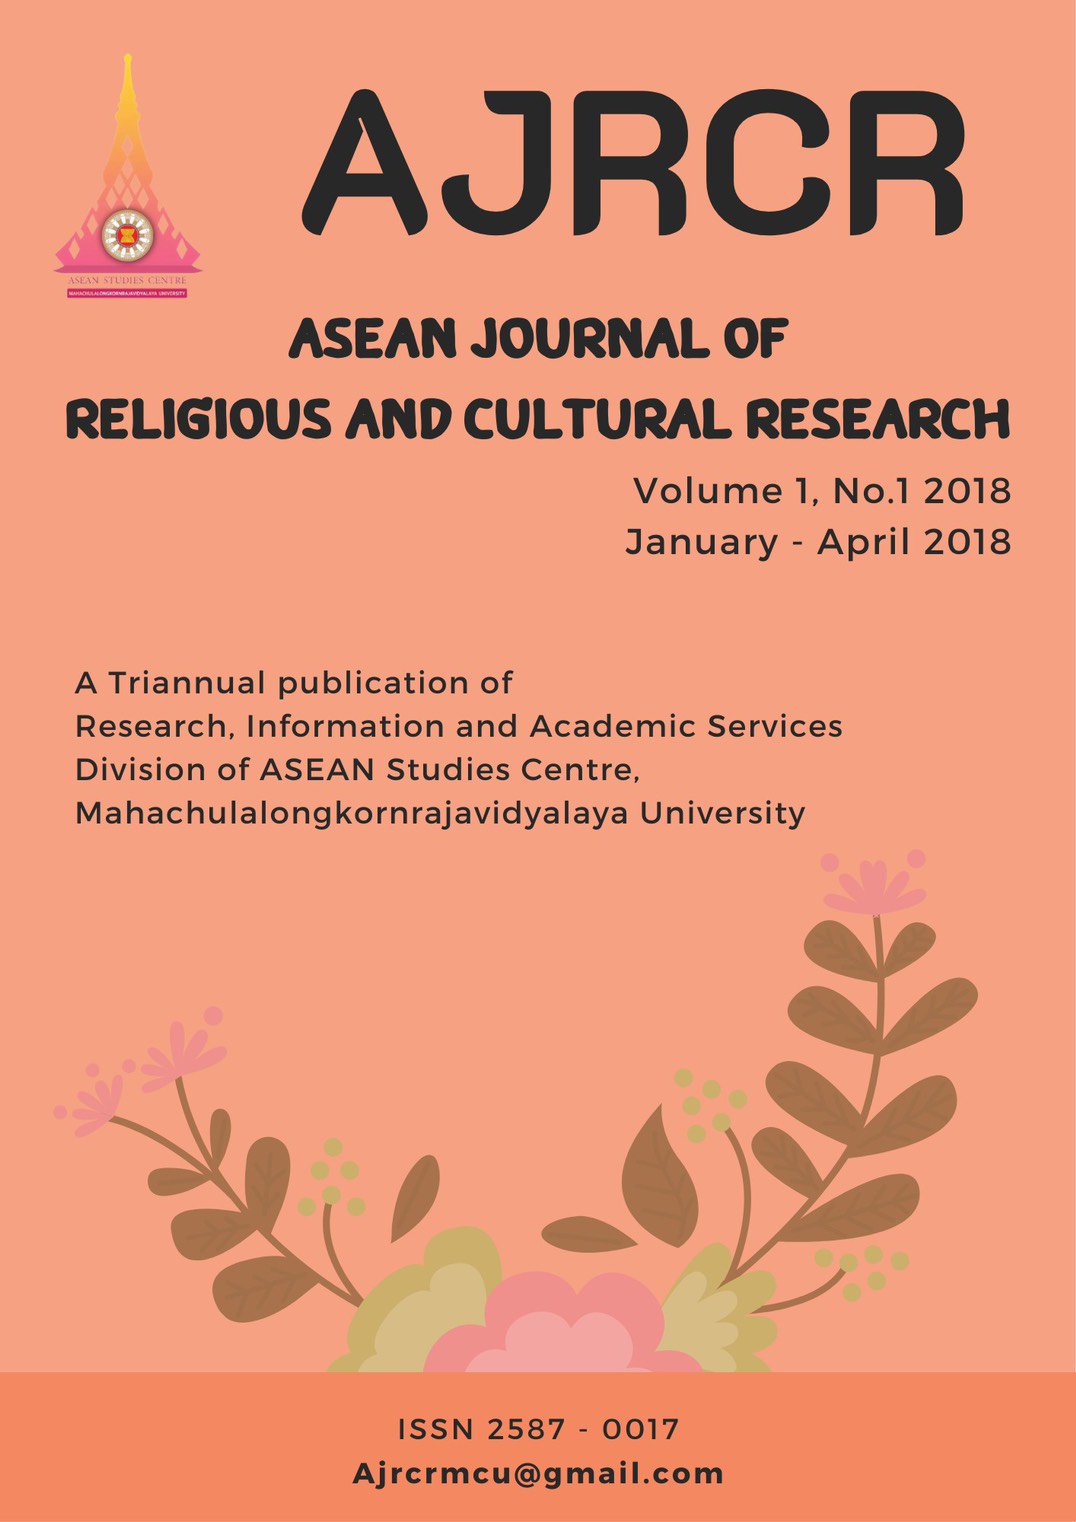 					View Vol. 1 No. 1 (2018): ASEAN Journal of Religious and Cultural Research (AJRCR)  
				